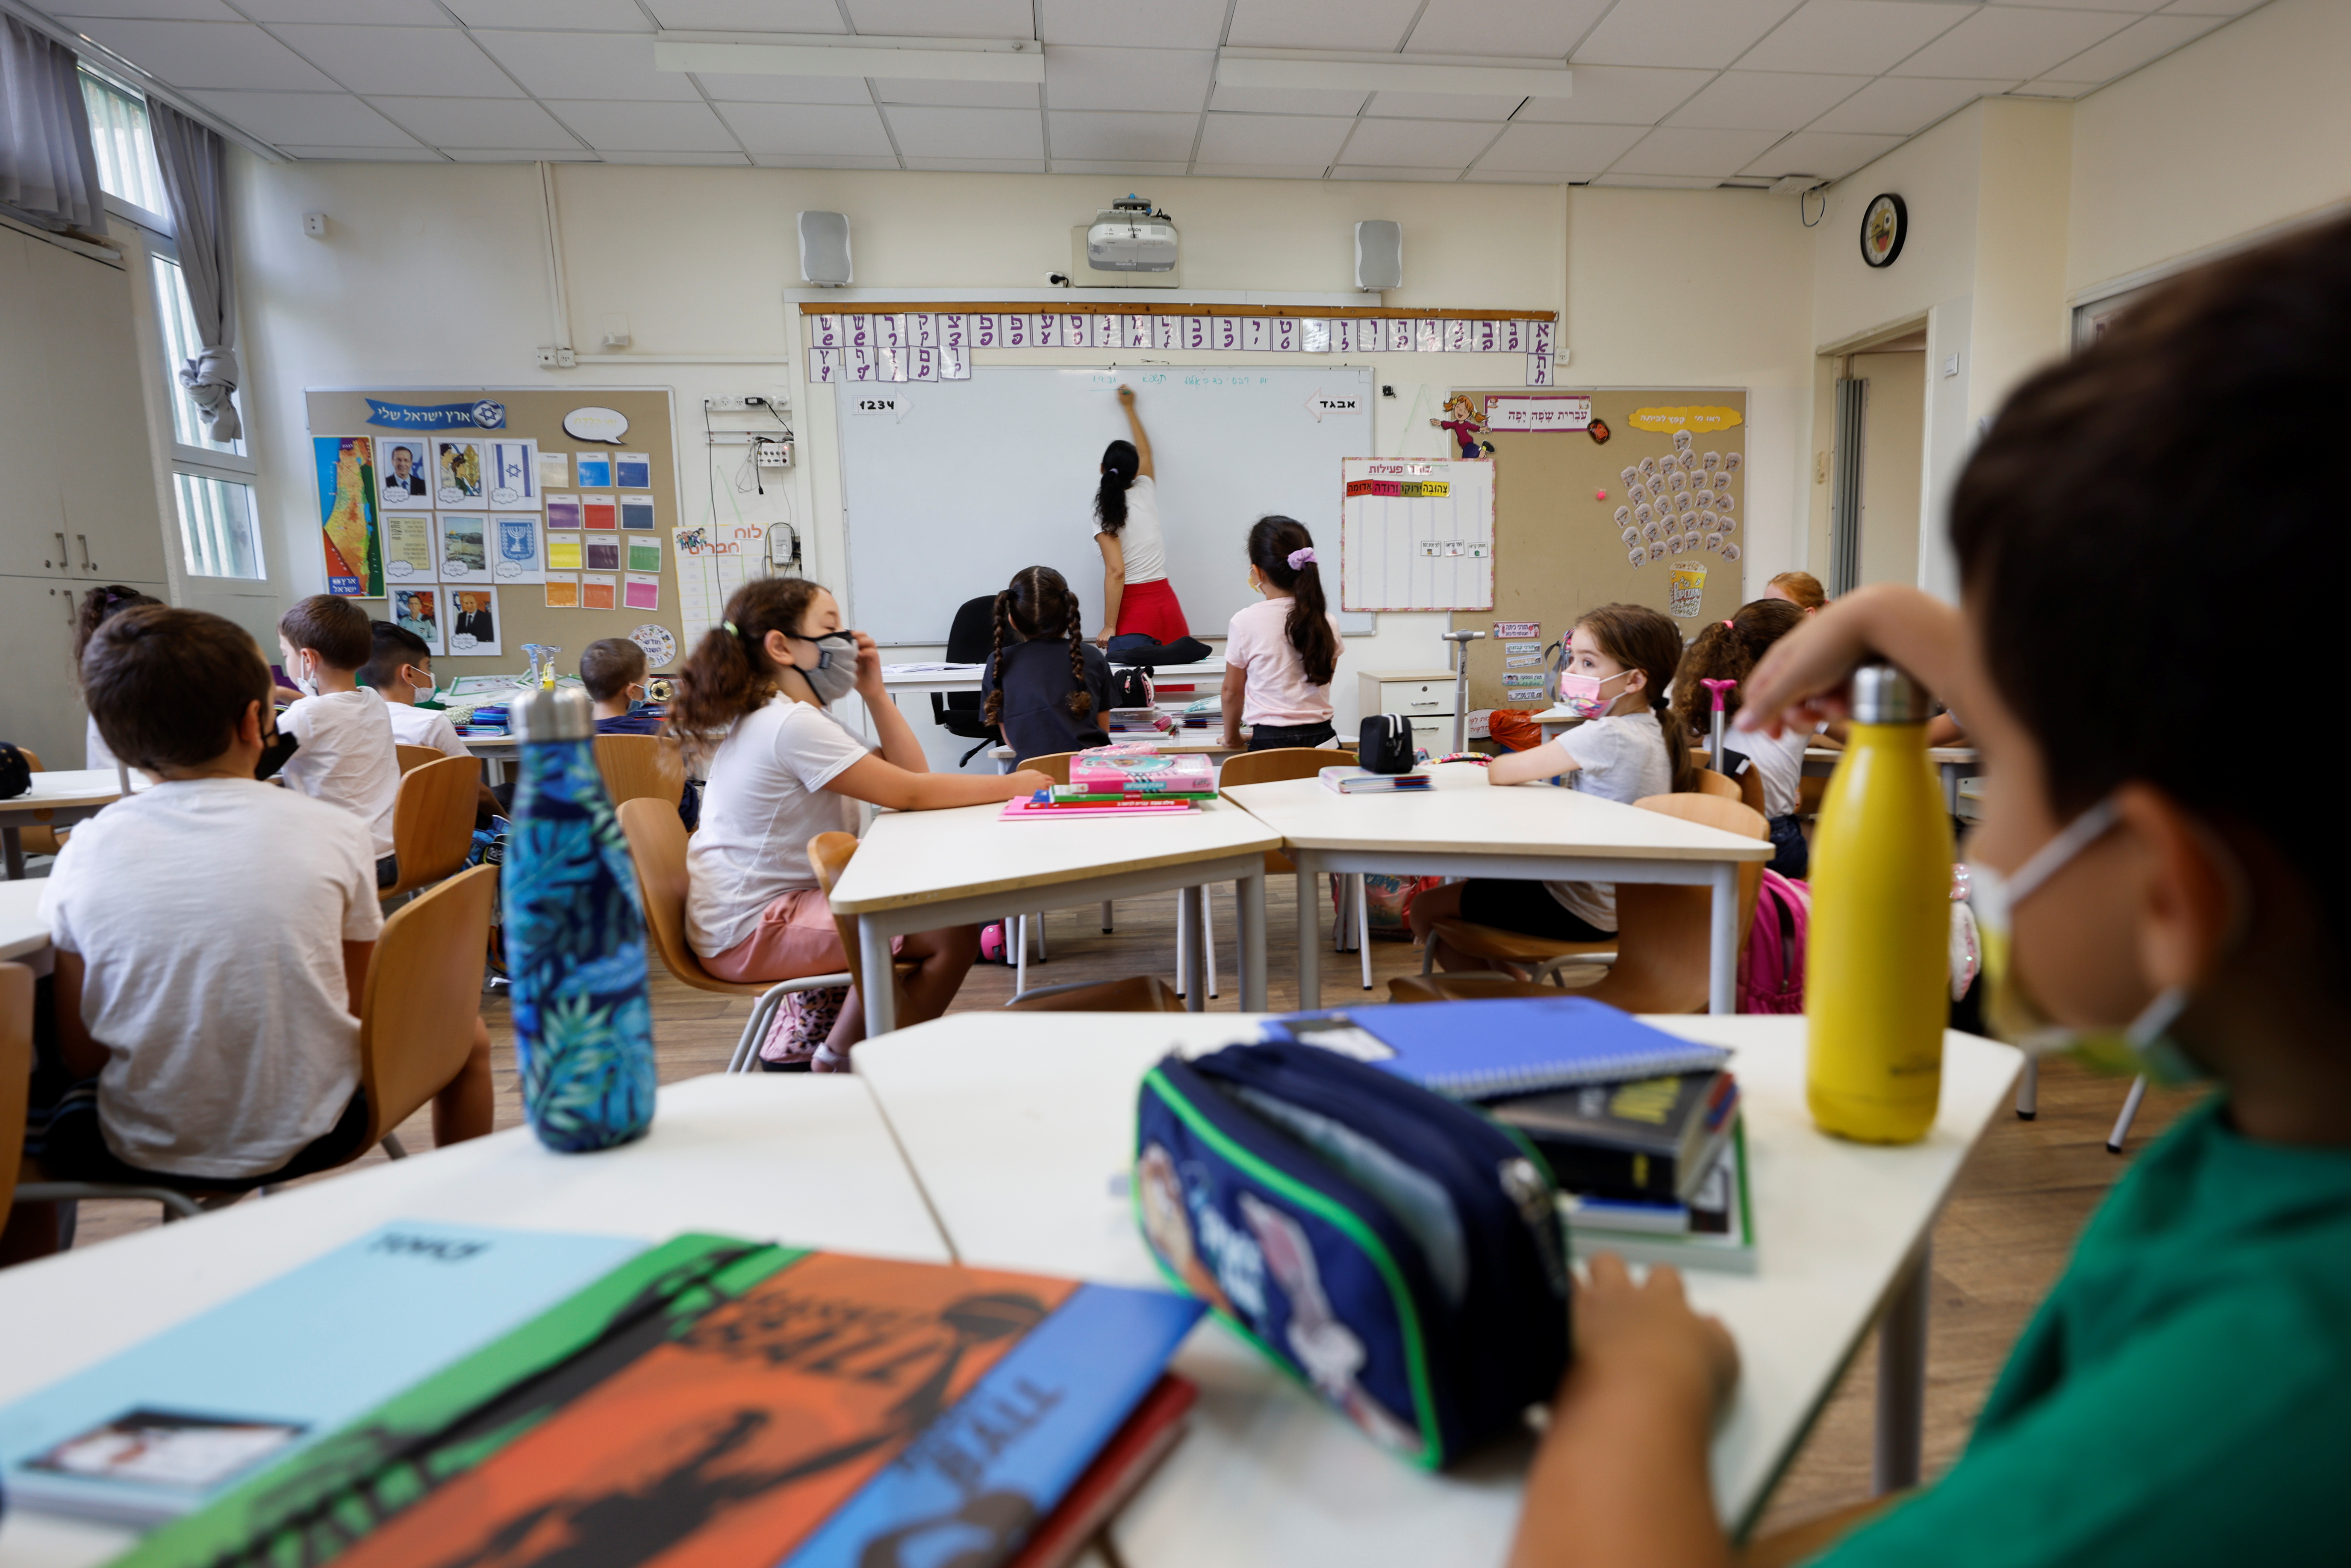 Students in Israel return to school under strict COVID-19 measures